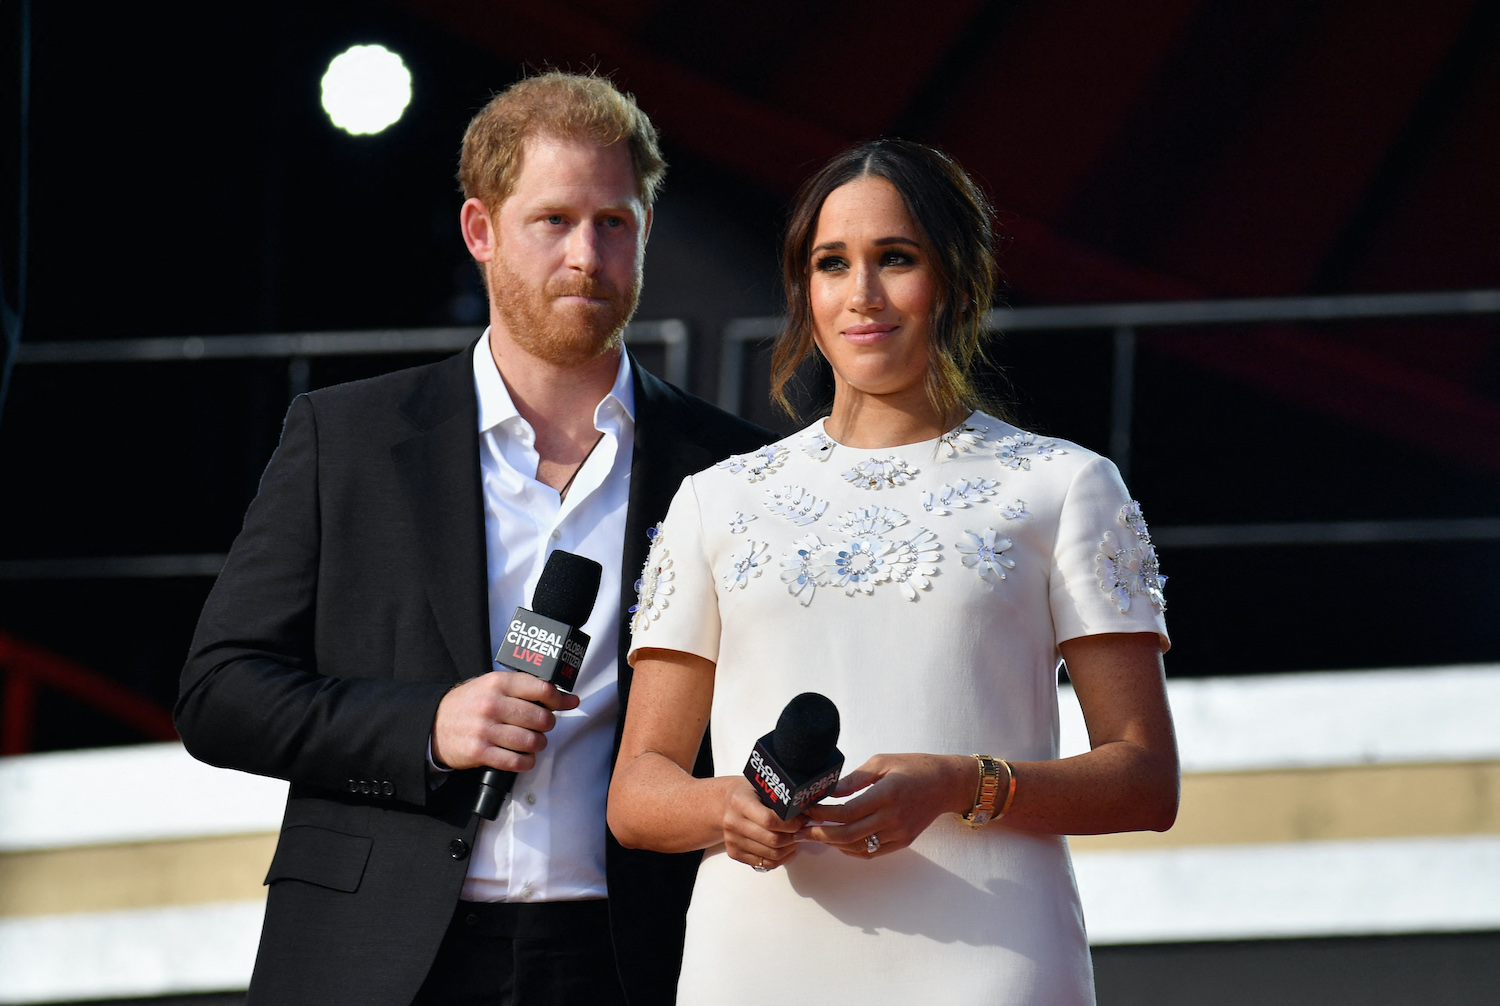 Prince Harry wears a suit and Meghan Markle wears a white dress during the 2021 Global Citizen Live festival in New York City